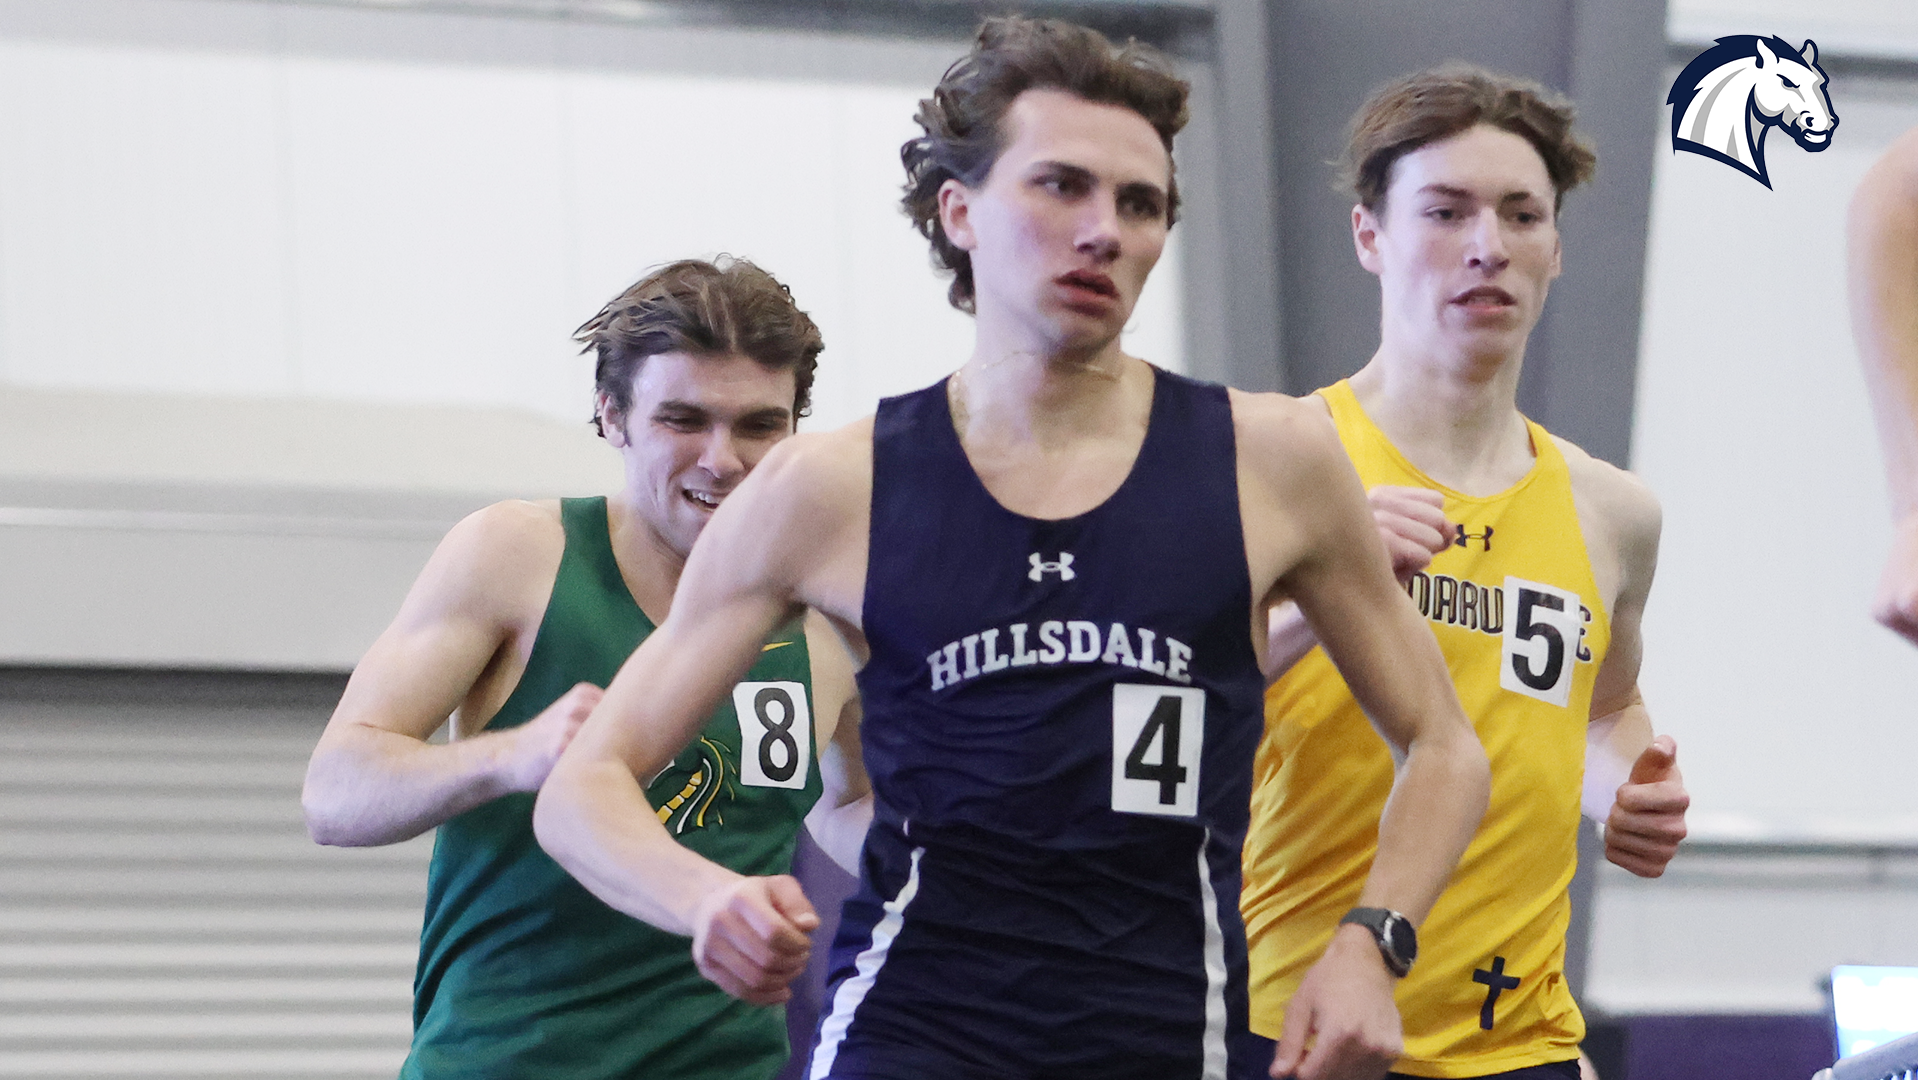 Charger men post two new provisional marks on final day of 2024 G-MAC Indoor Championships